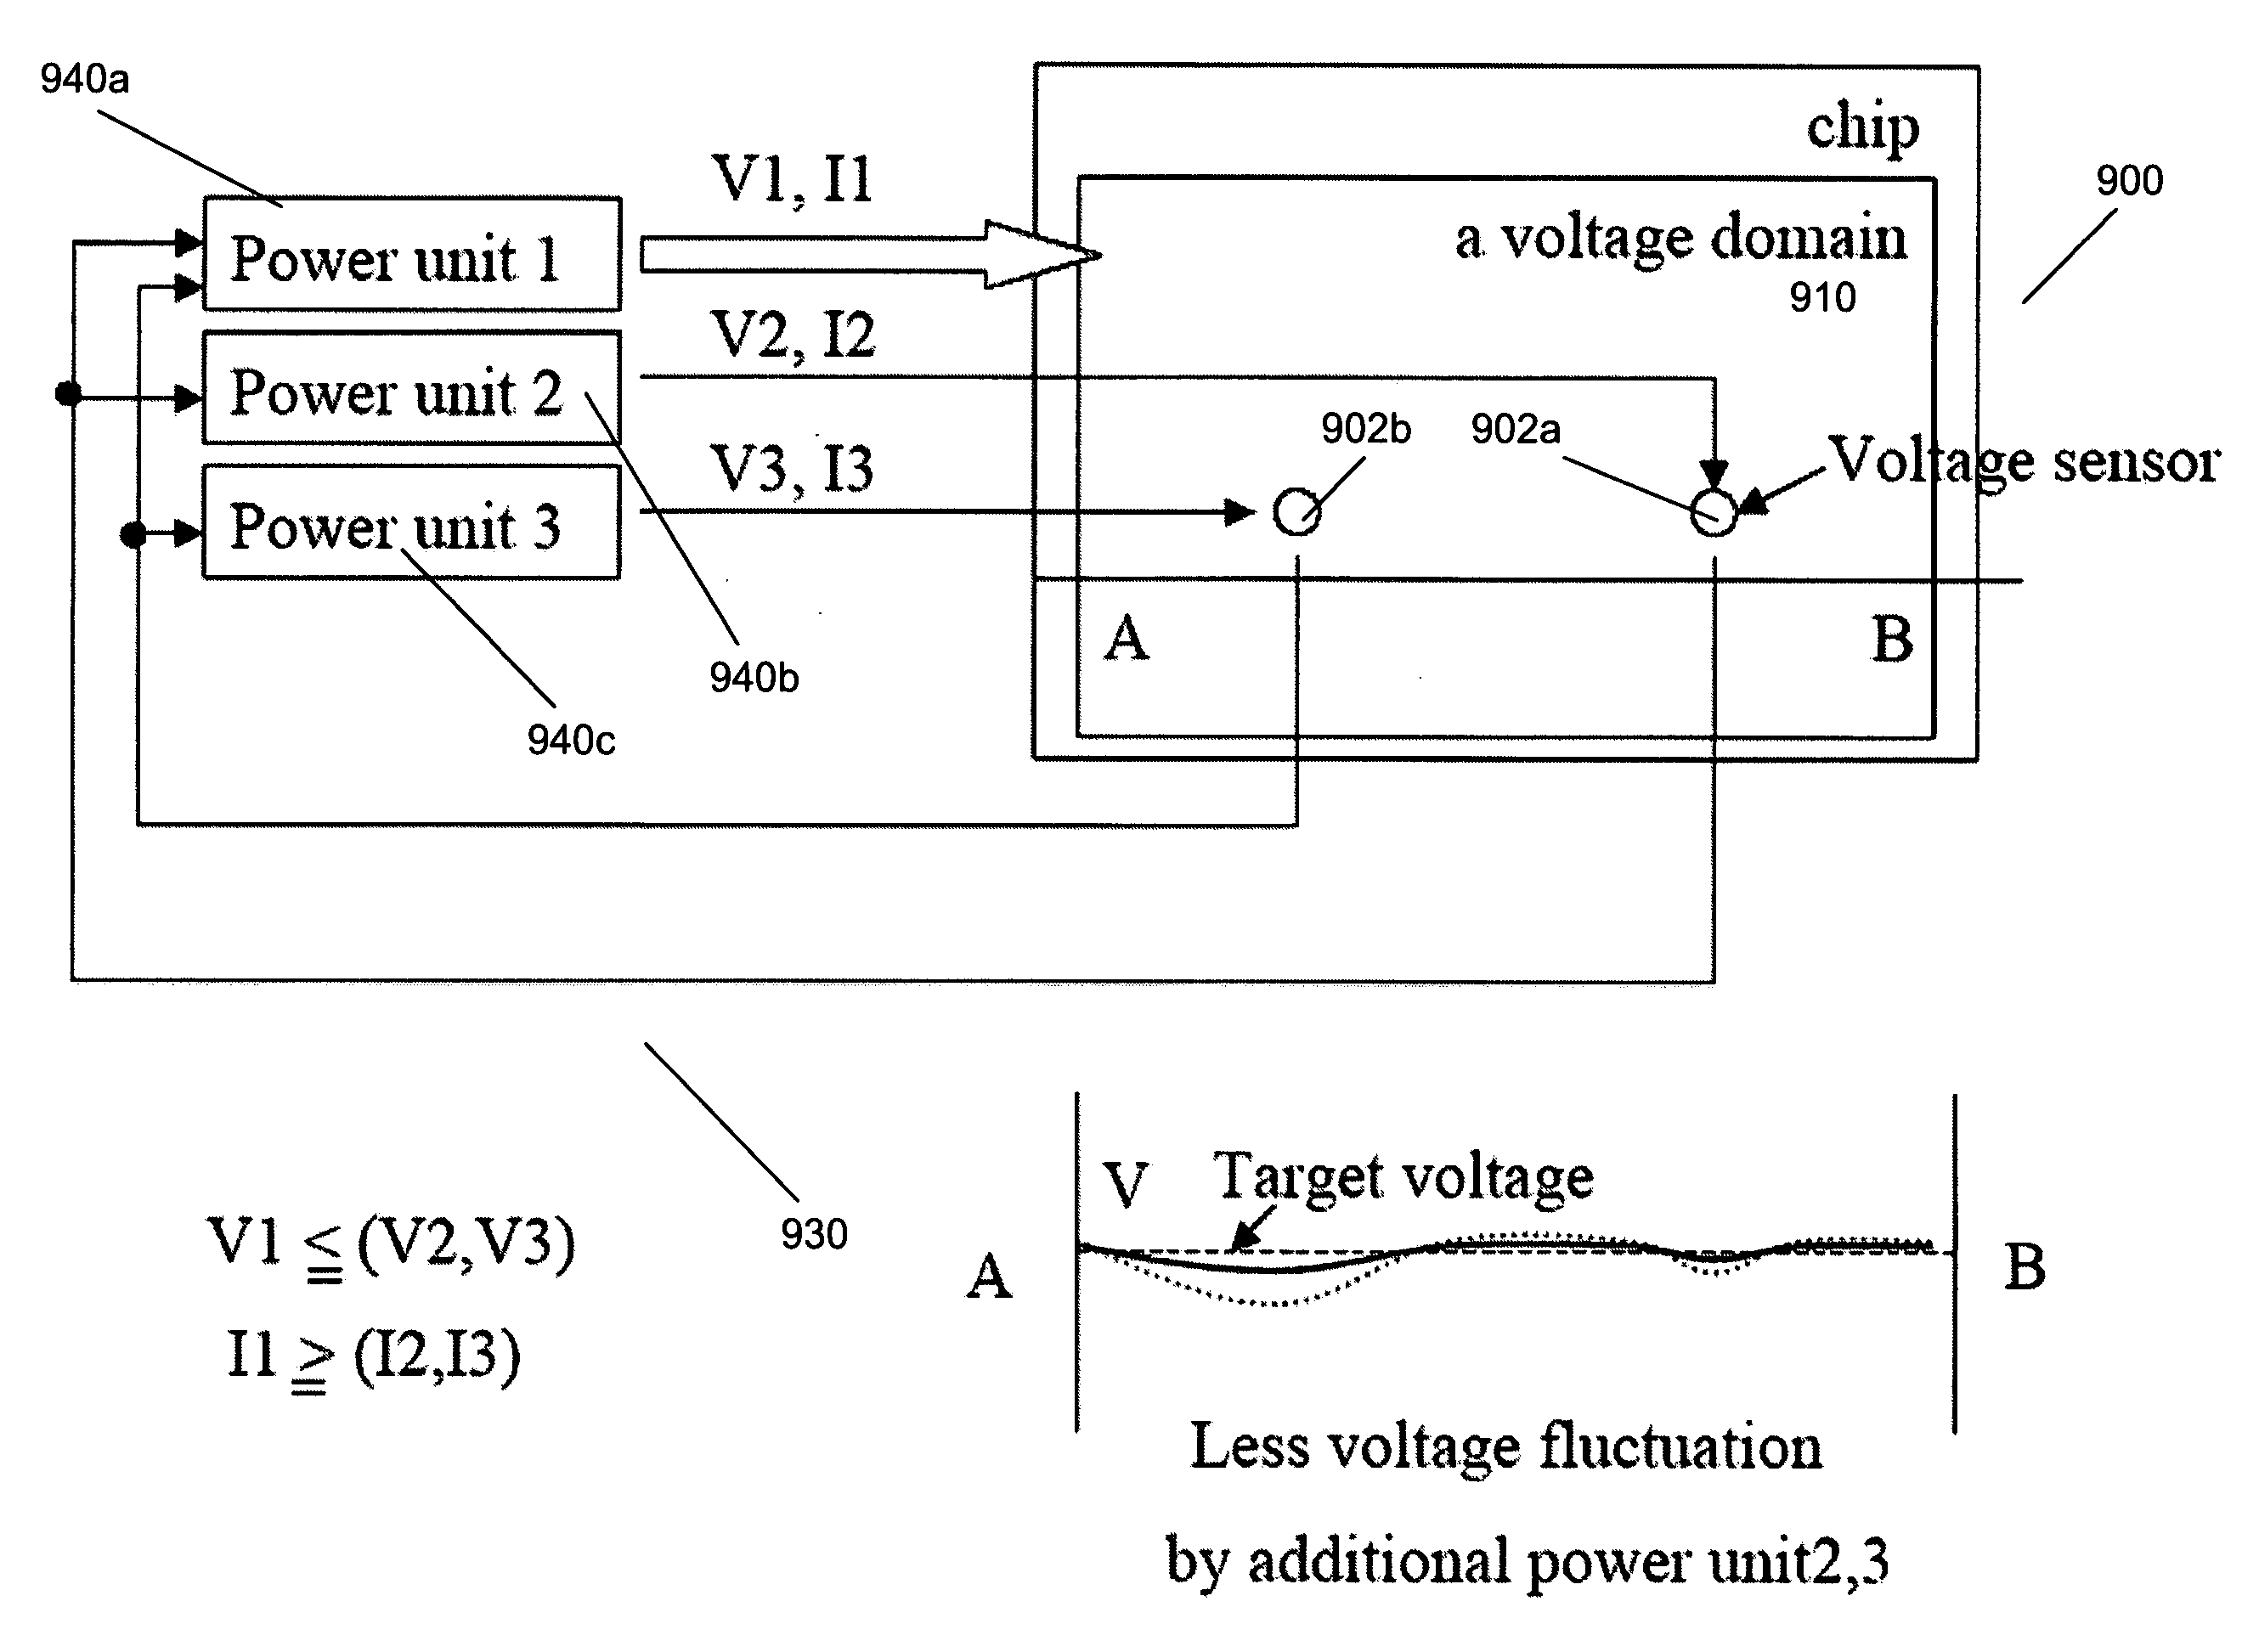 Method and system for improved power distribution in a semiconductor device through use of multiple power supplies